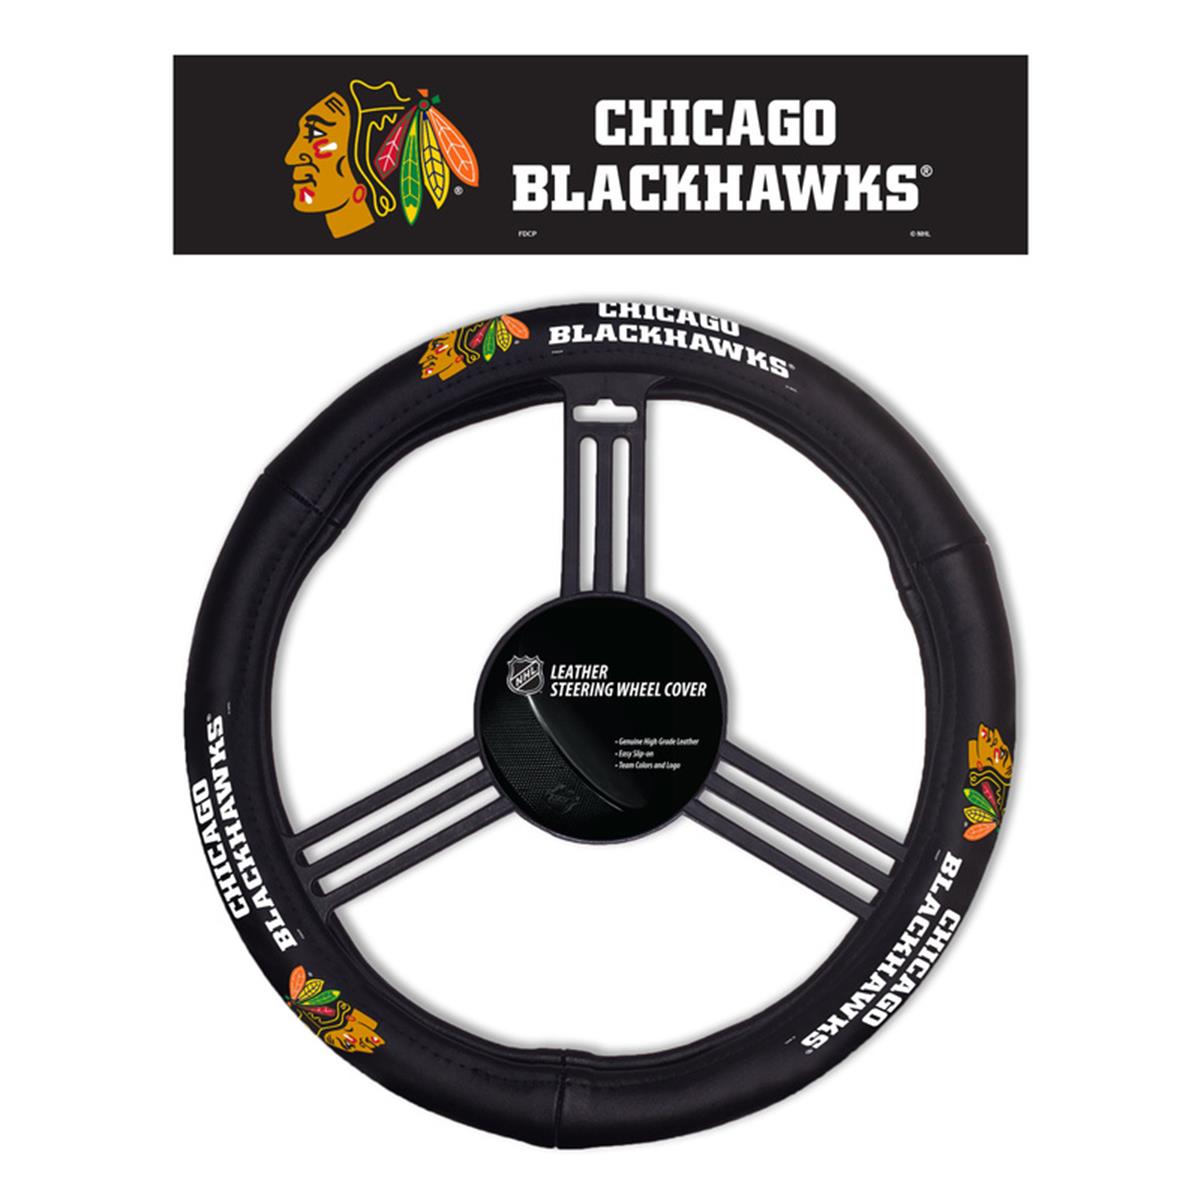 Picture of Fremont Die 2324588114 MLB Chicago Blackhawks Steering Wheel Cover - Leather